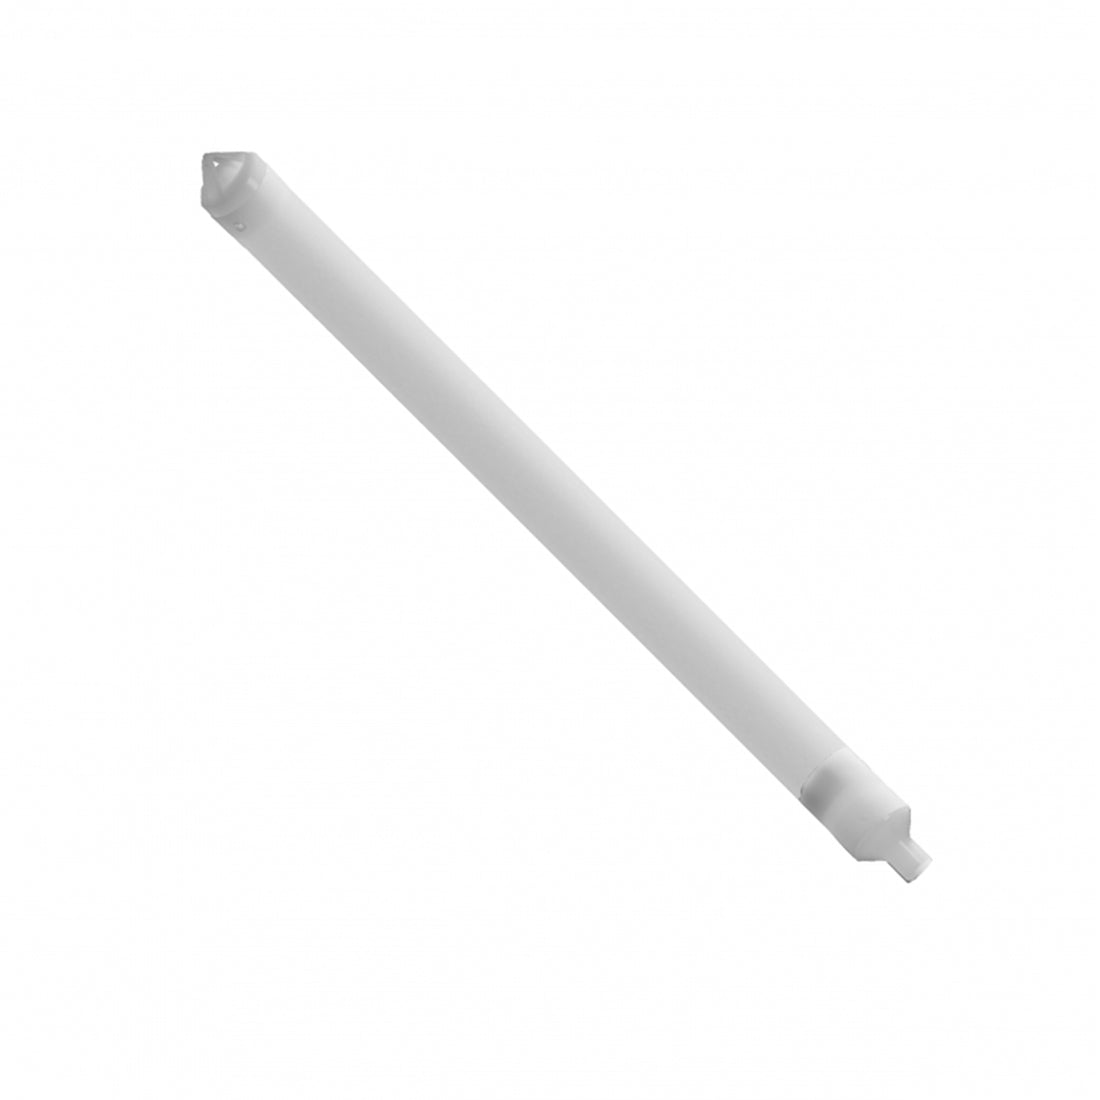 Bailer, Disposable, FEP Weighted Double-Check - 1.6'' x 36''